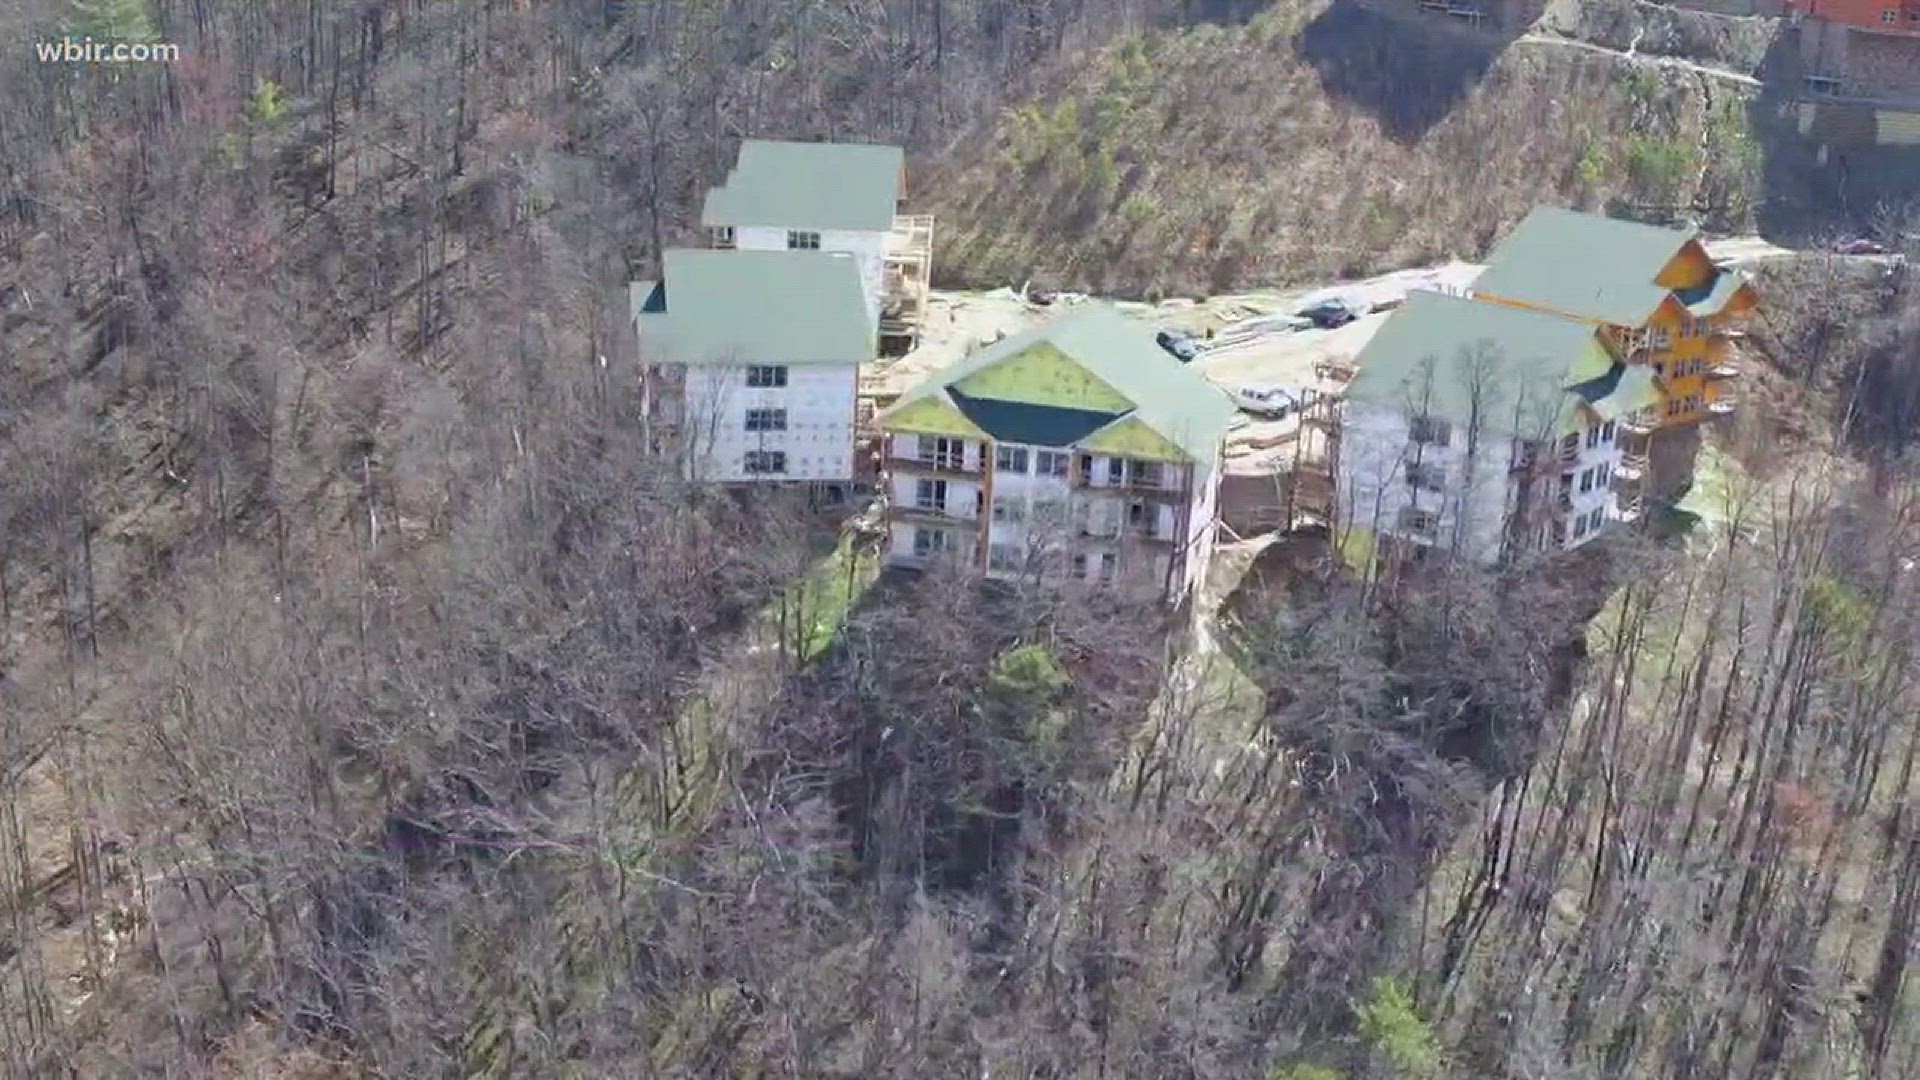 March 14, 2018: Officials are investigating the cause of a fire that destroyed a building at Westgate Smoky Mountain Resorts in Gatlinburg.